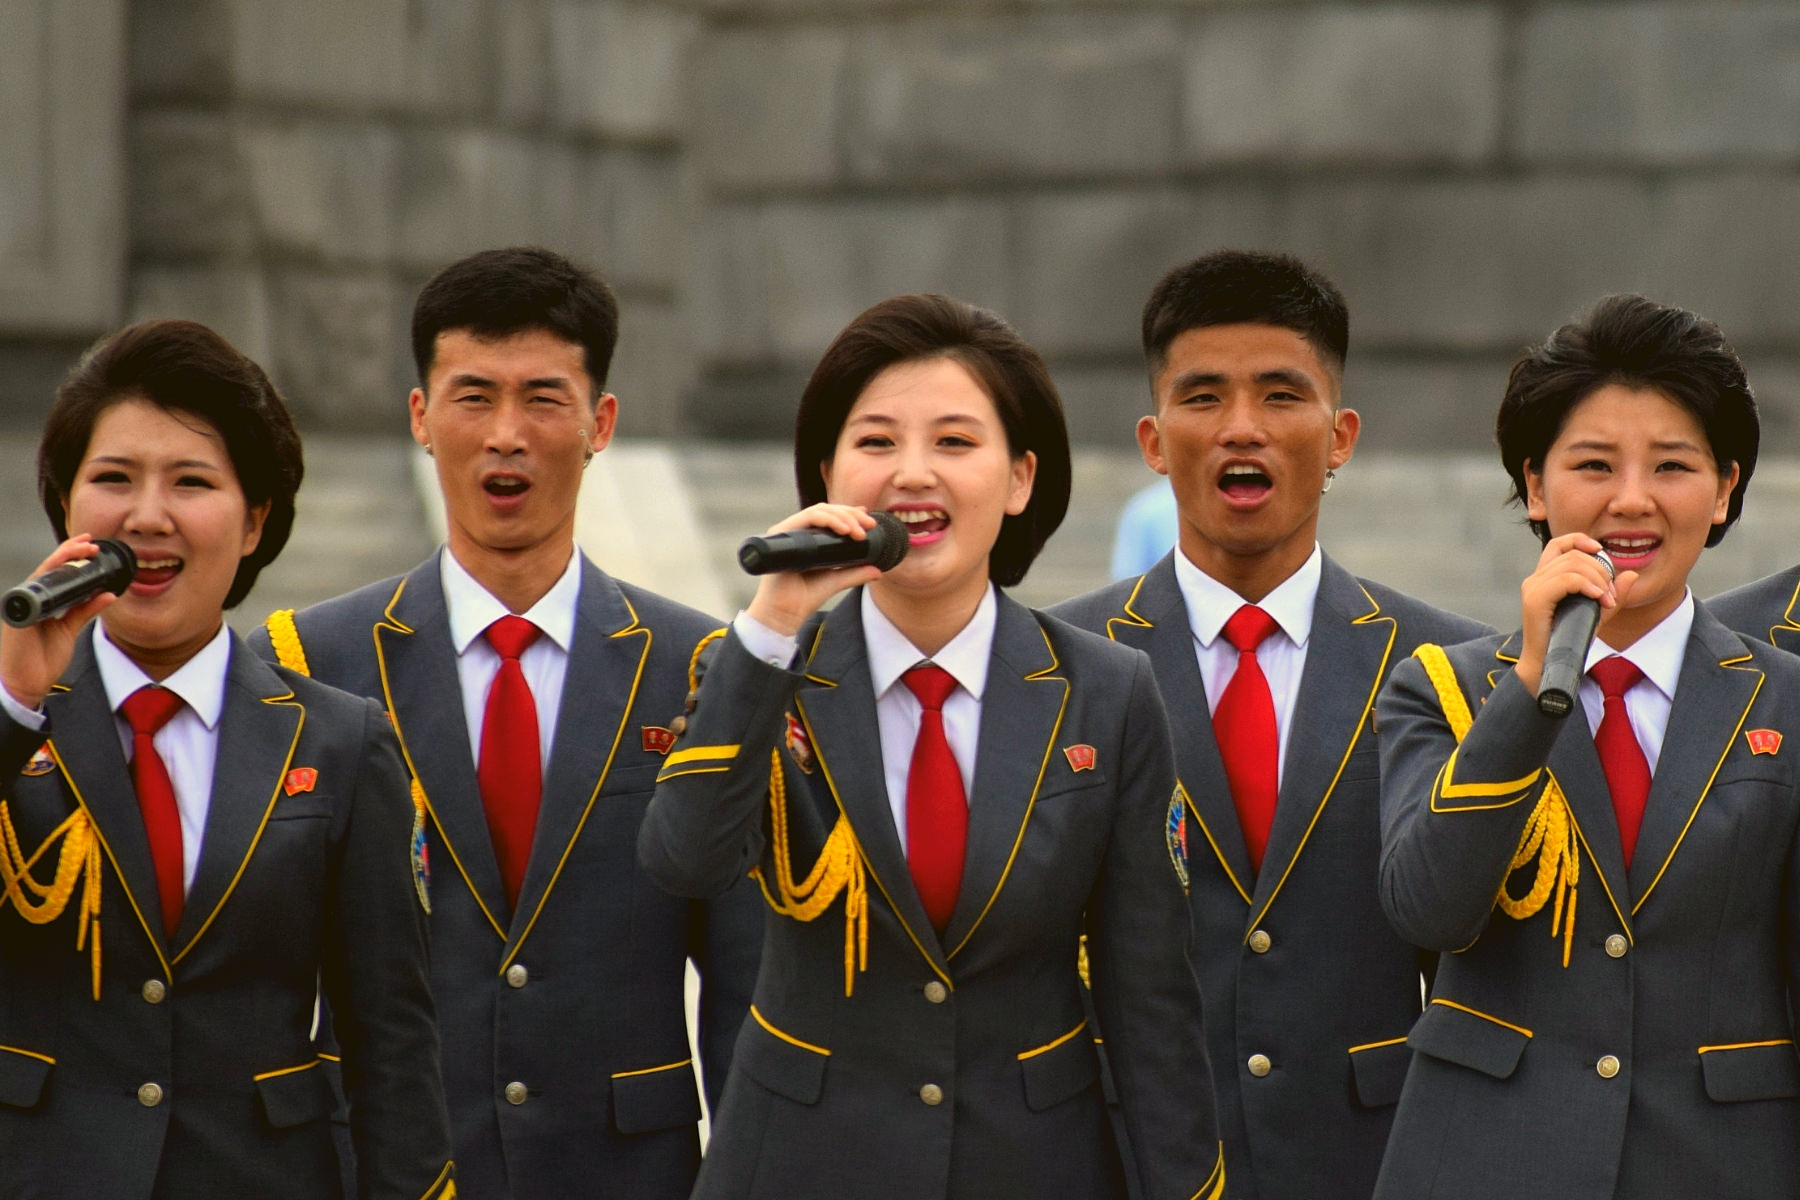 Performance by the Party Monument in Pyongang held by singers in North Korea to celebrate the Liberation of Korea from Japanese colonial rule (15 août ). Picture taken by KTG. Join us to explore North Korea (DPRK)